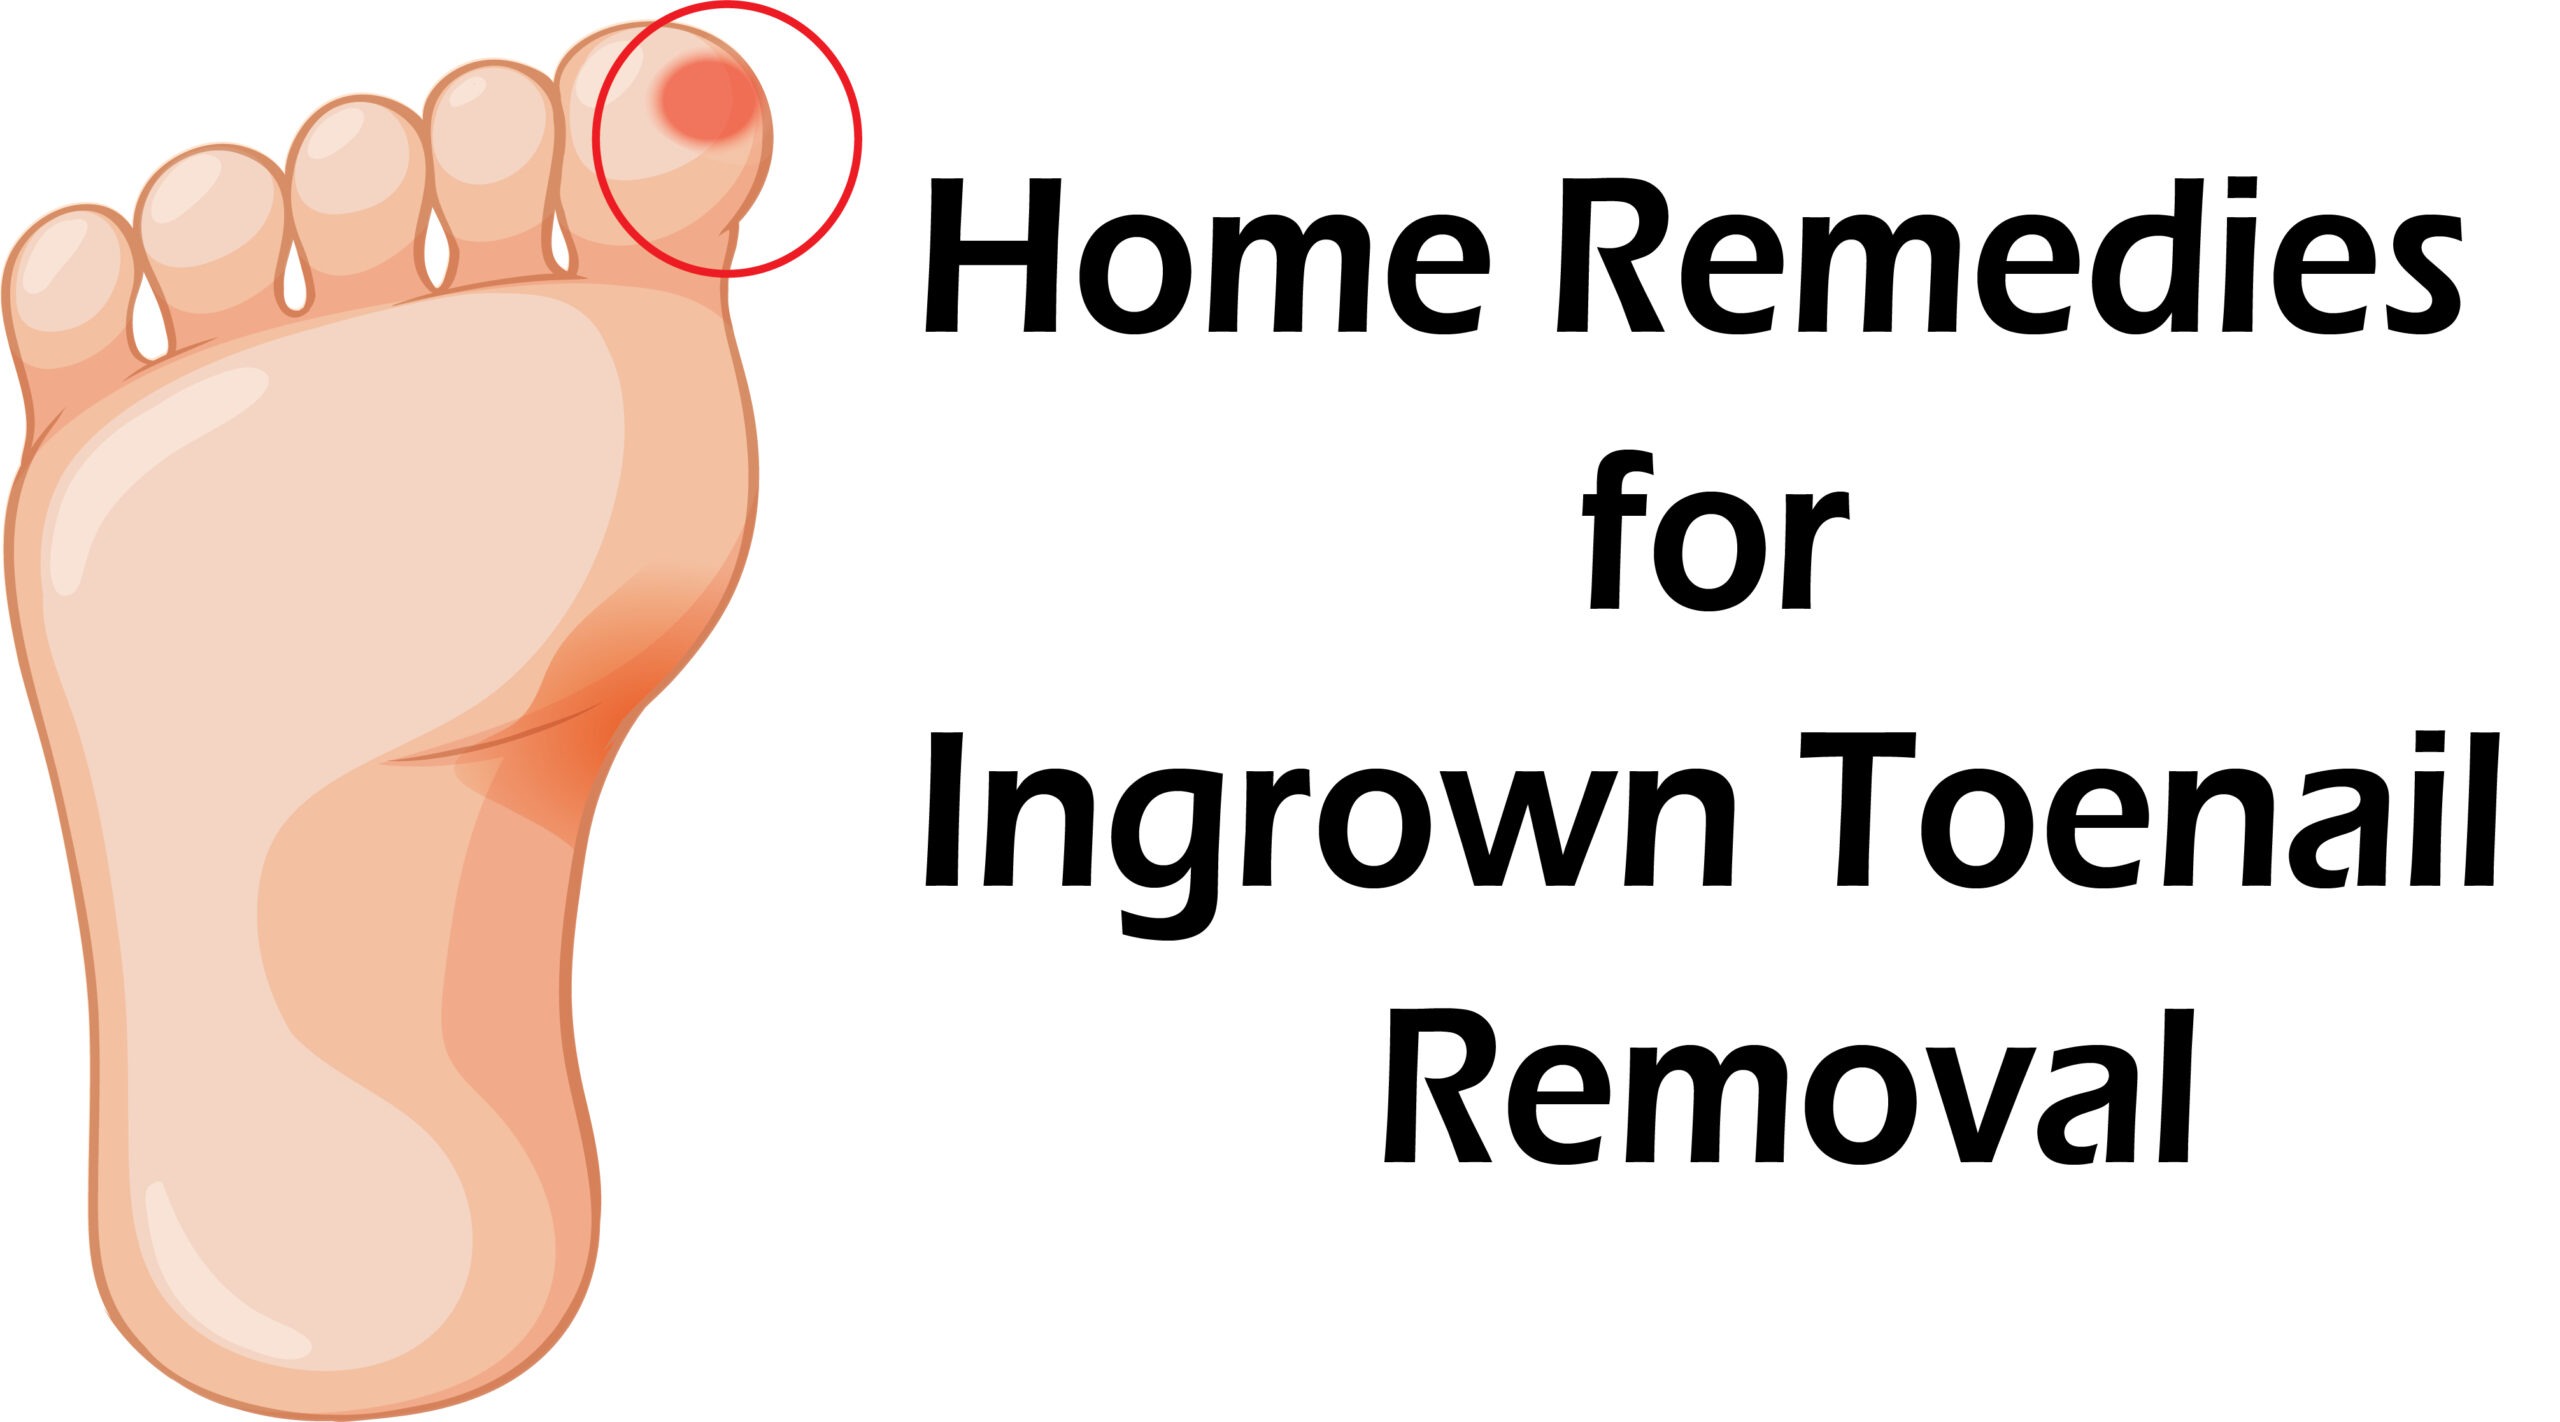 Home Remedies for Ingrown Toenail Removal